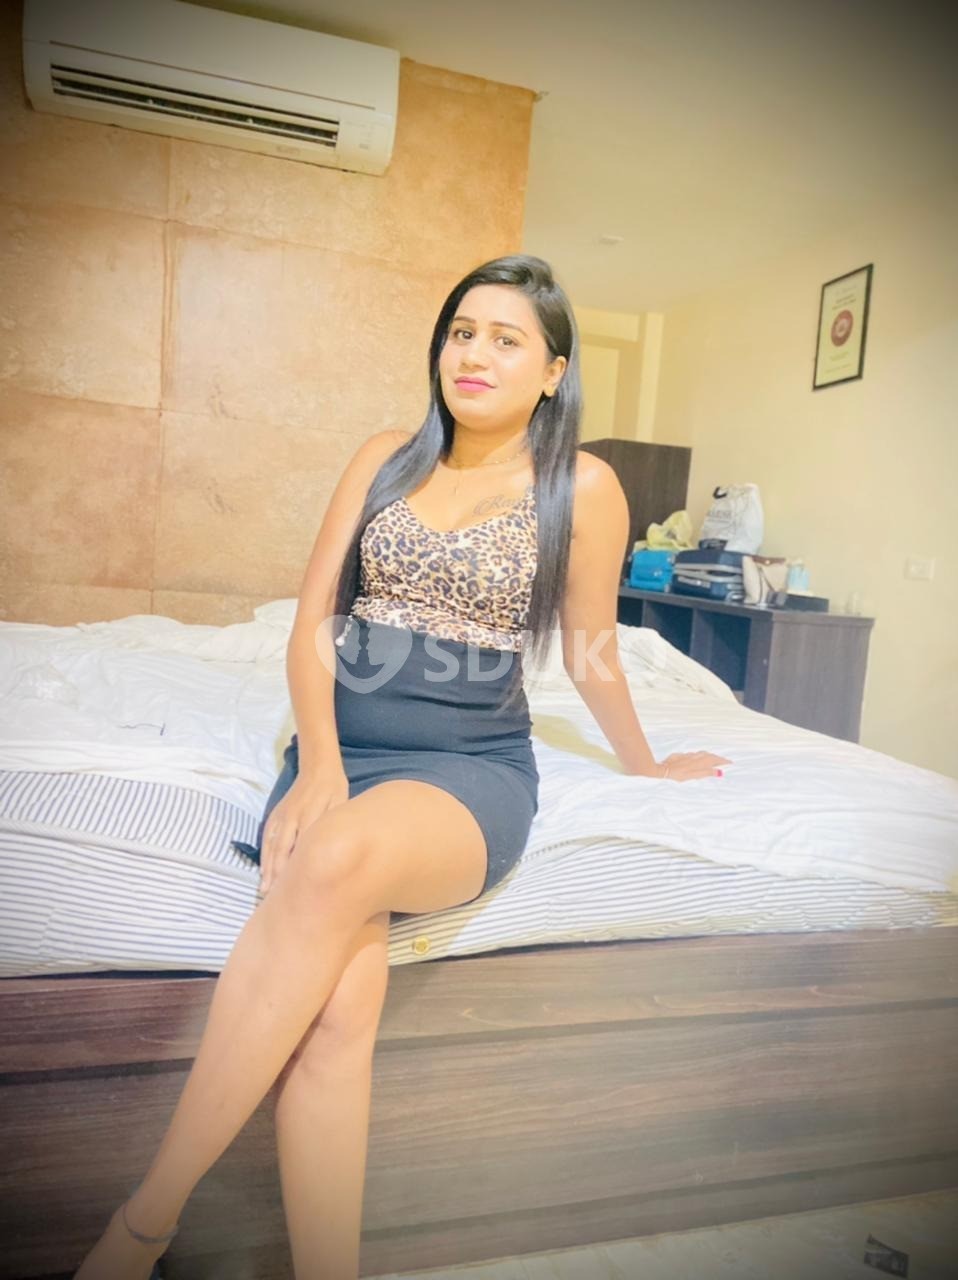 ROHINI ✨ 24×7 DOORSTEP INCALL ❤ OUTCALL SERVICE AVAILABLE CALL ME NOW LOW RATE PRIVATE DECENT LOCAL COLLAGE GIRL HO